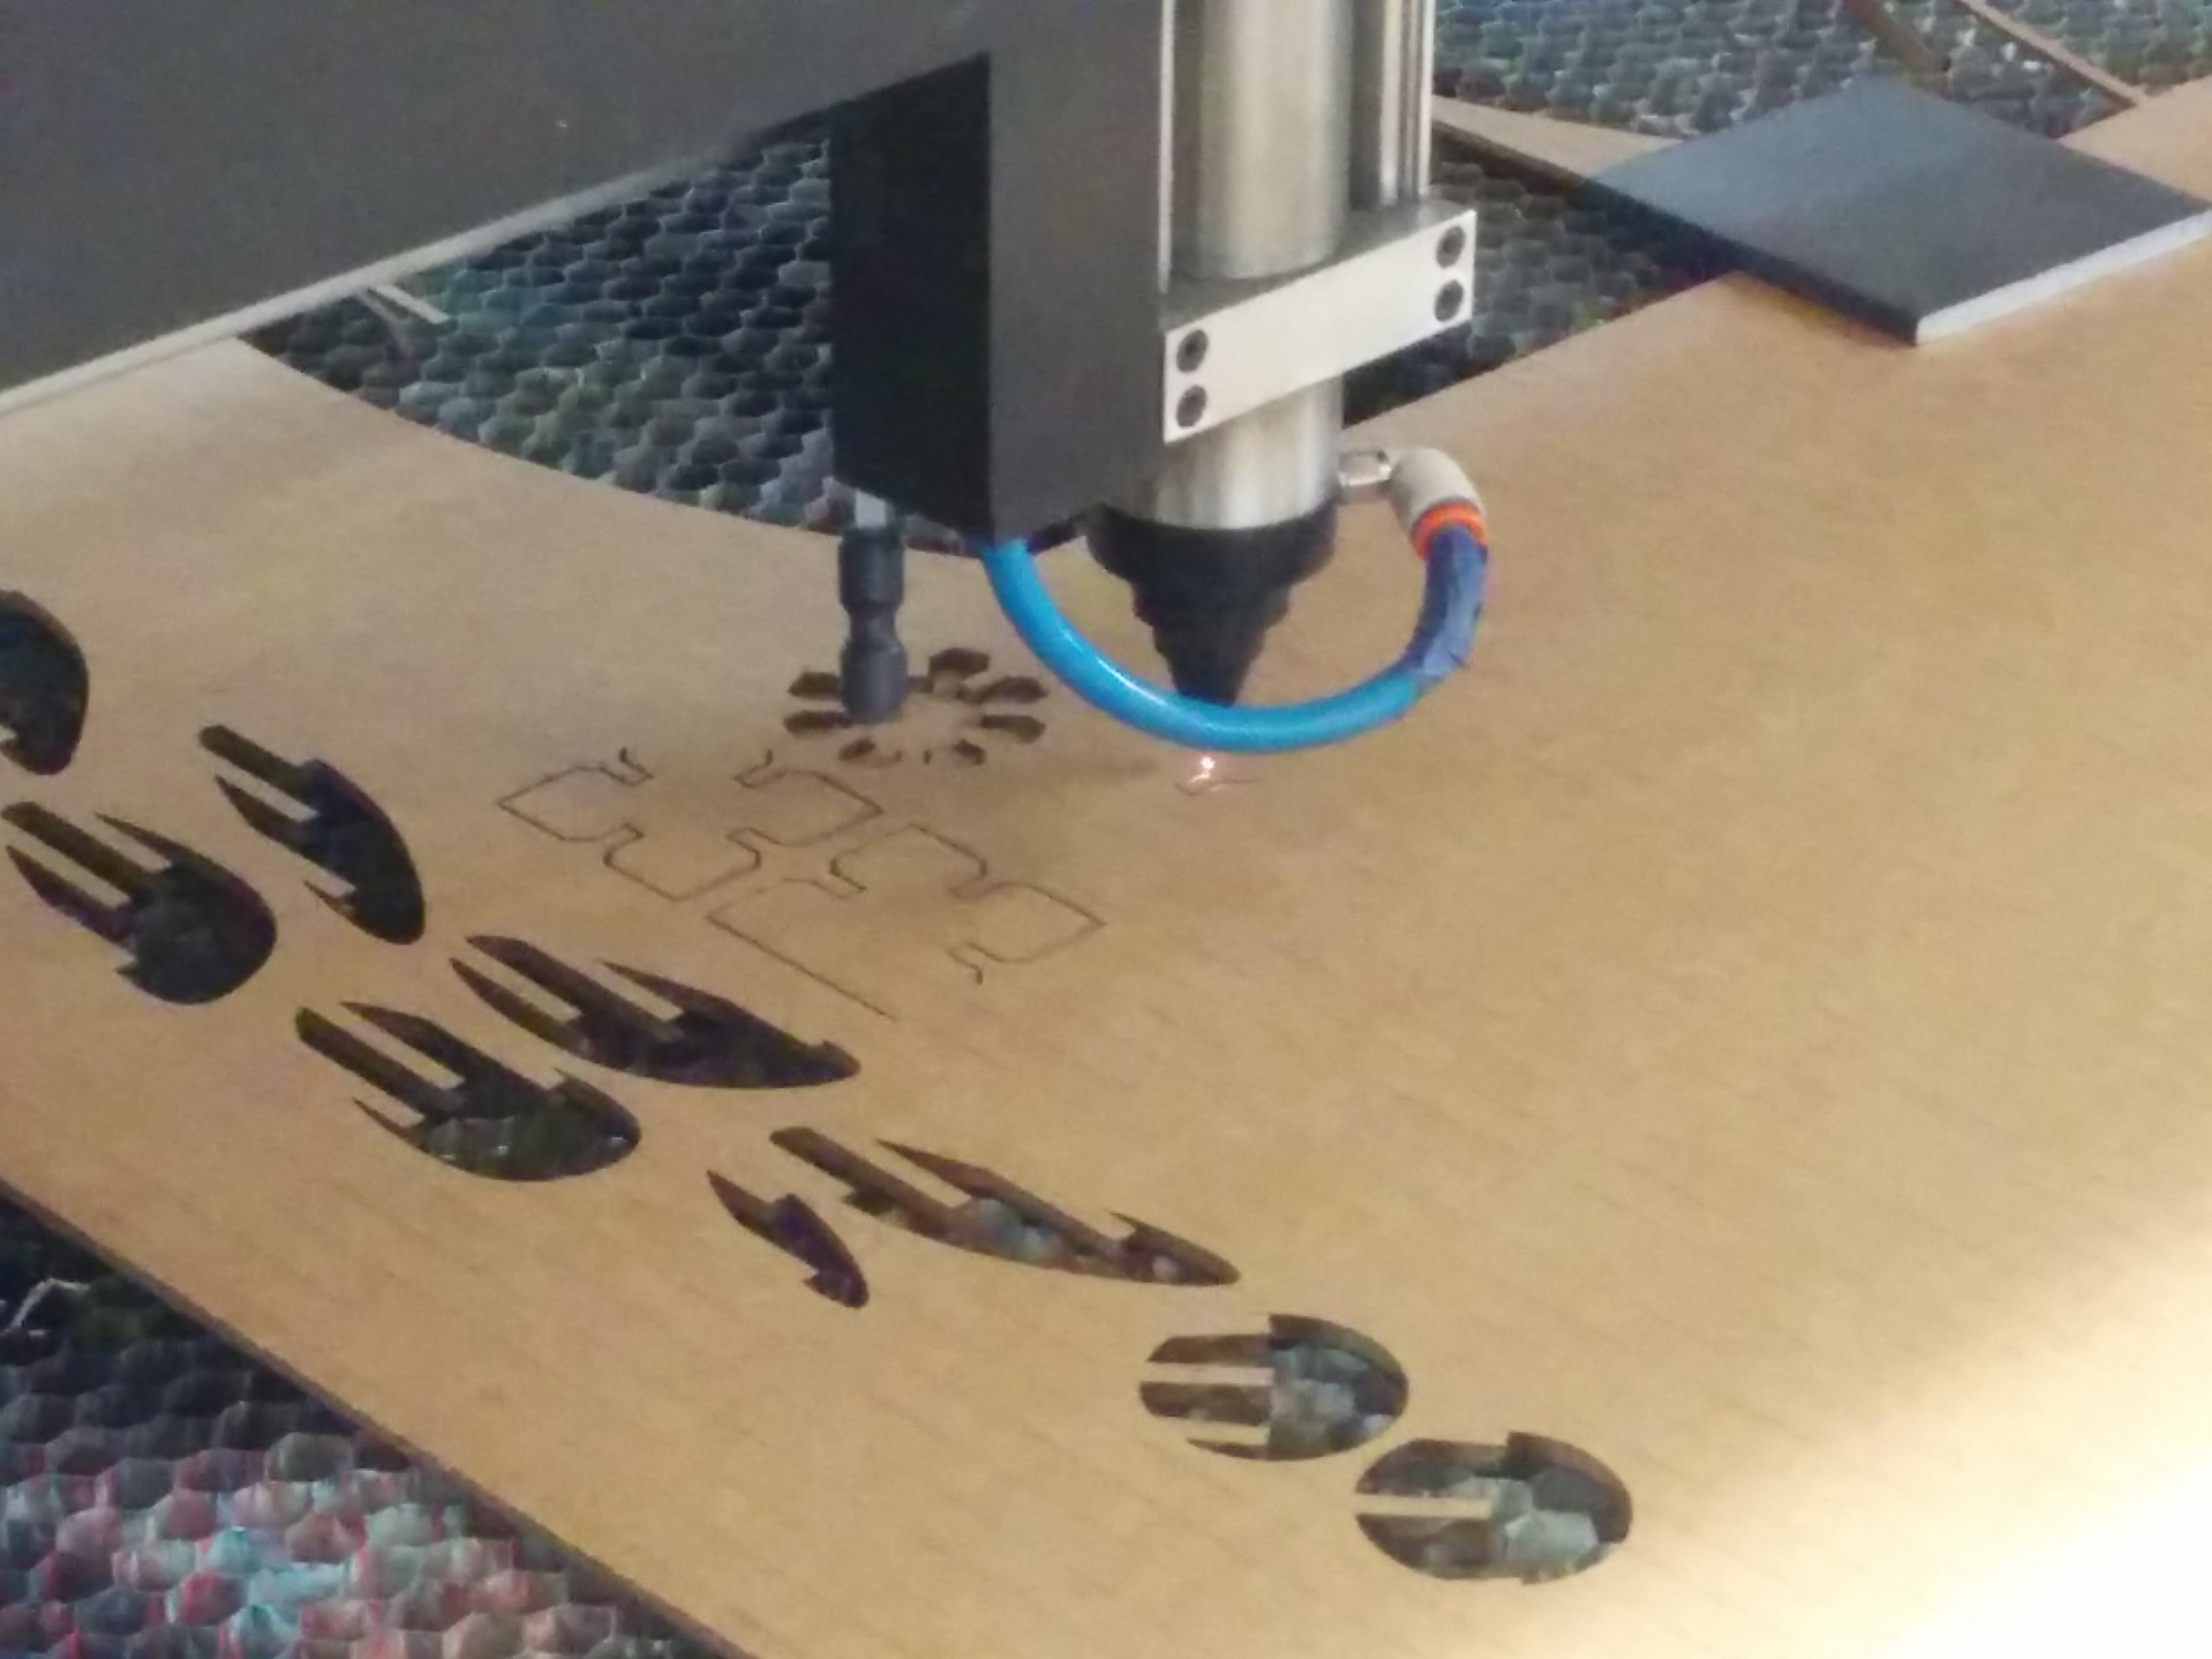 The laser cutter in action.